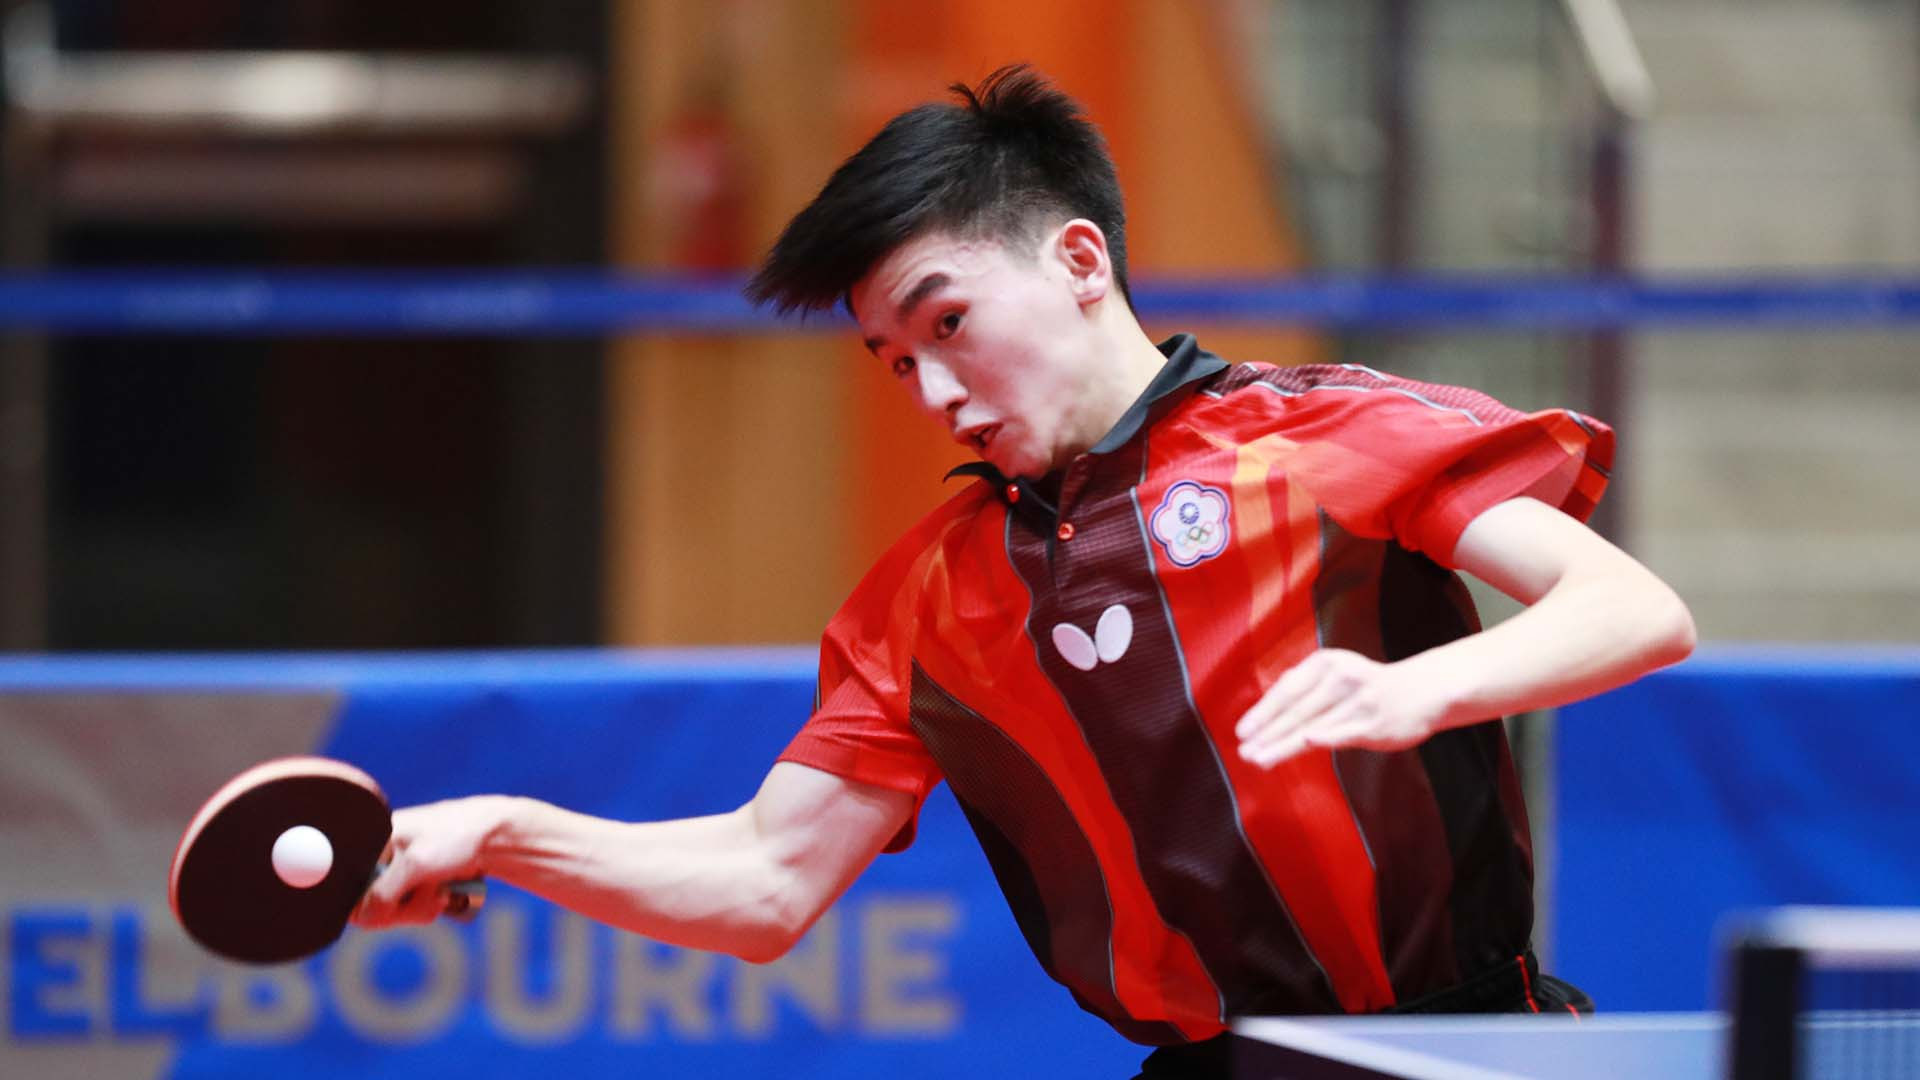 Li Hsin-Yang helped Chinese Taipei book a place in the boys' team semi-finals at the ITTF World Junior Championships in Australia today ©Rémy Gros/ITTF